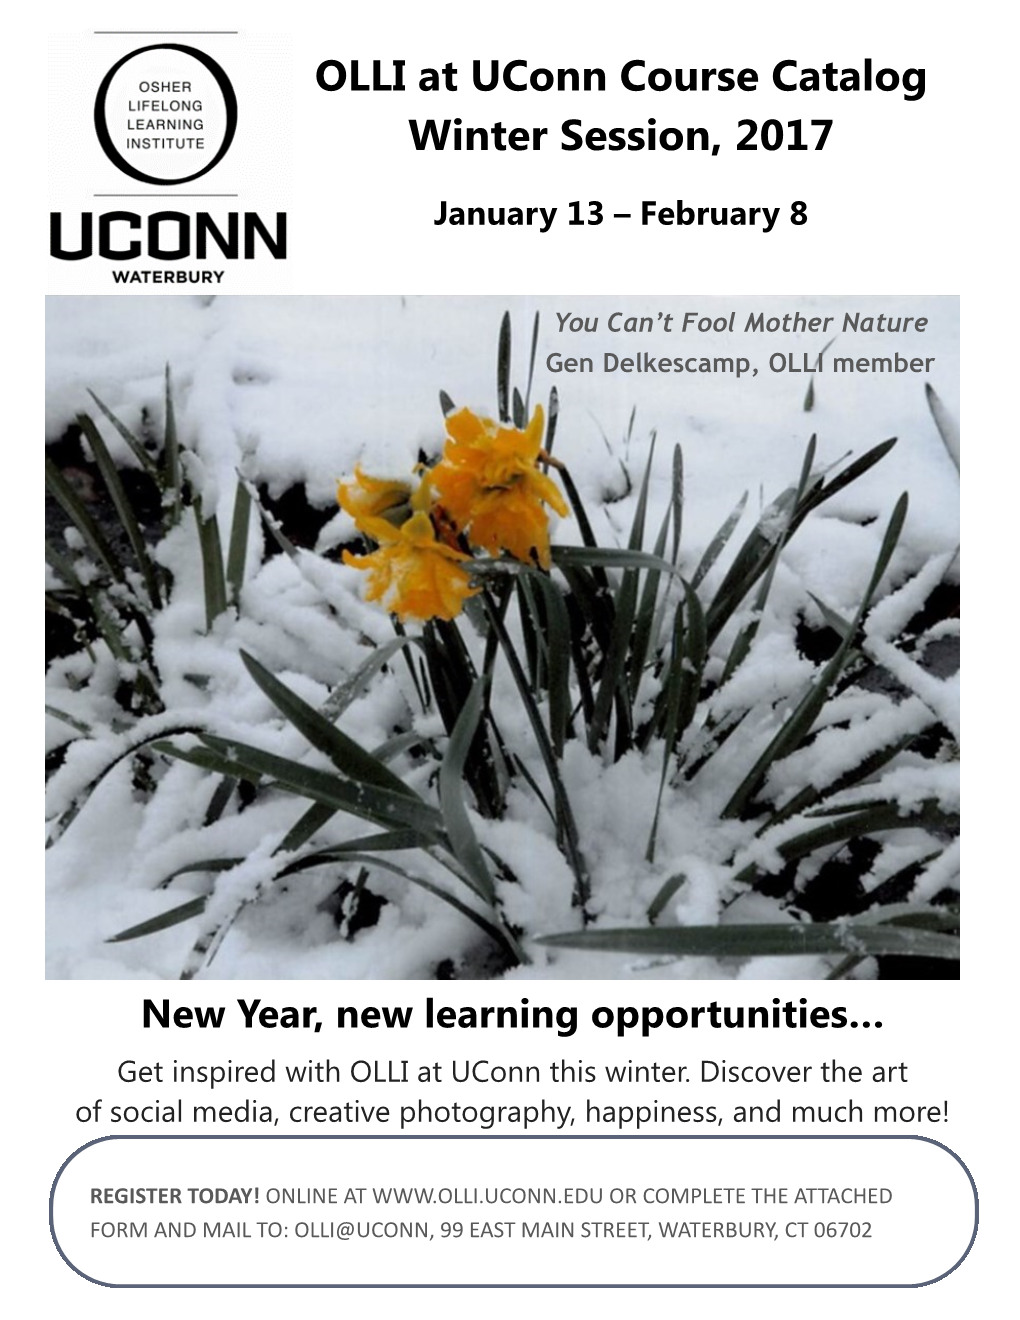 OLLI at Uconn Course Catalog Winter Session, 2017